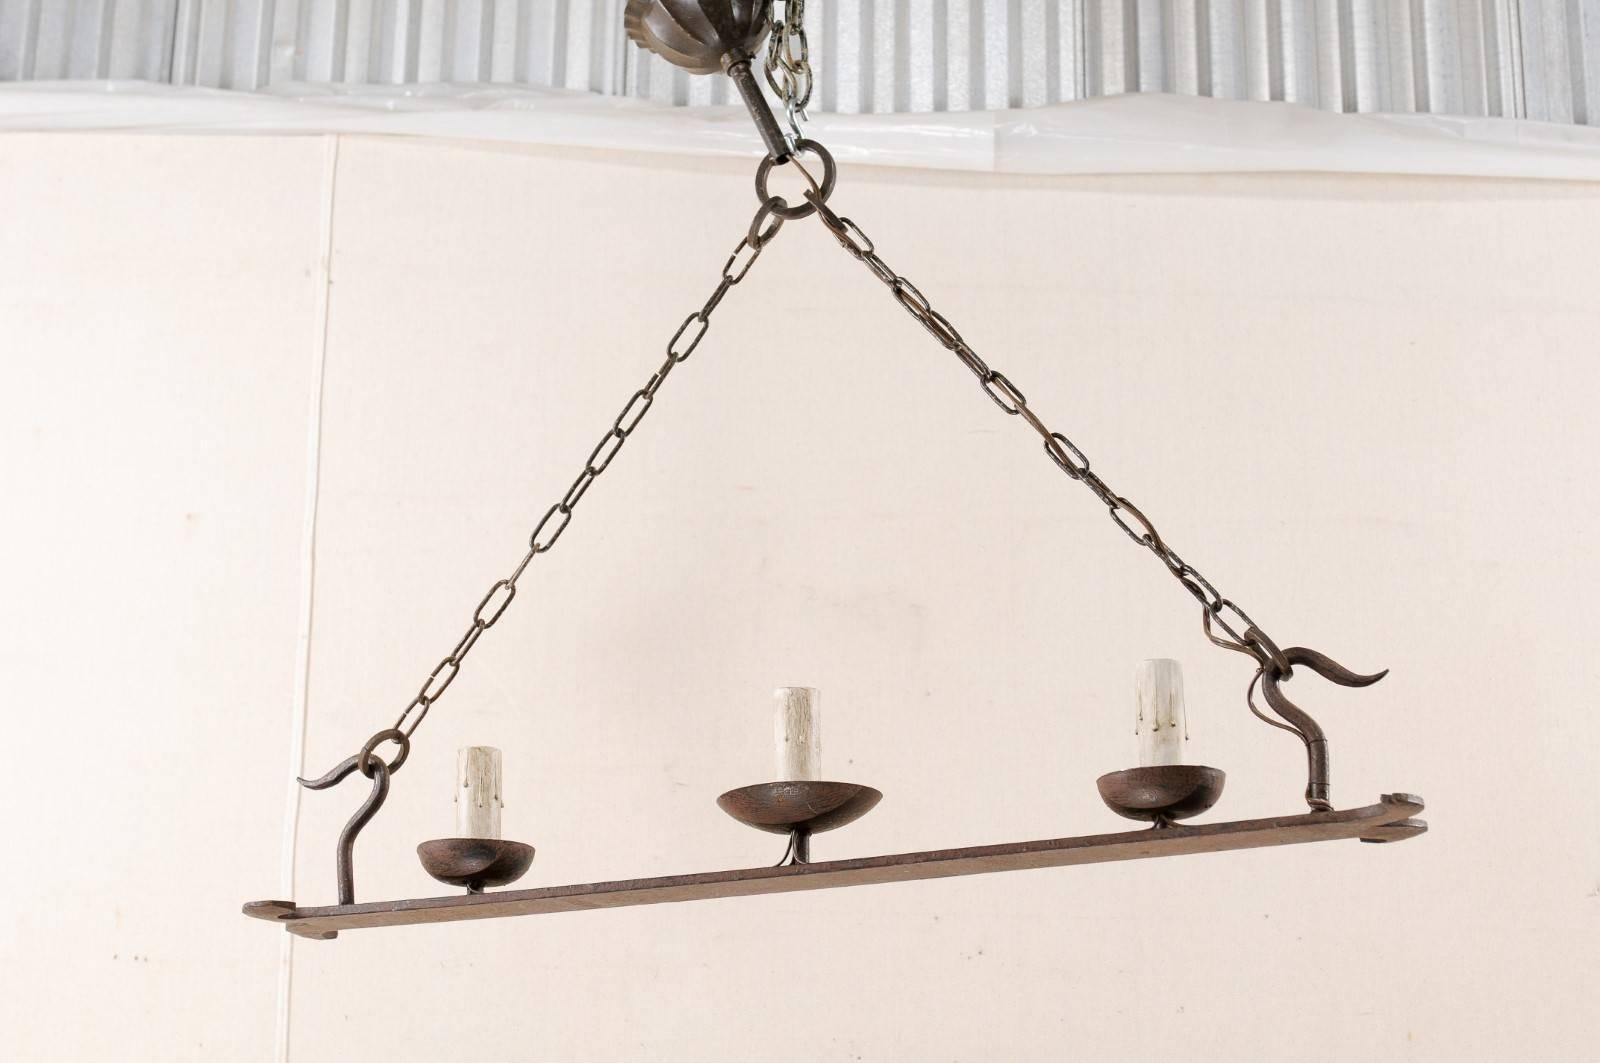 A French iron three-light vintage chandelier. This French rectangular-shaped chandelier from the mid-20th century, features a flattened, oblong forged-iron beam with decorative split-ends, topped with three cupped iron bobèches and painted candle